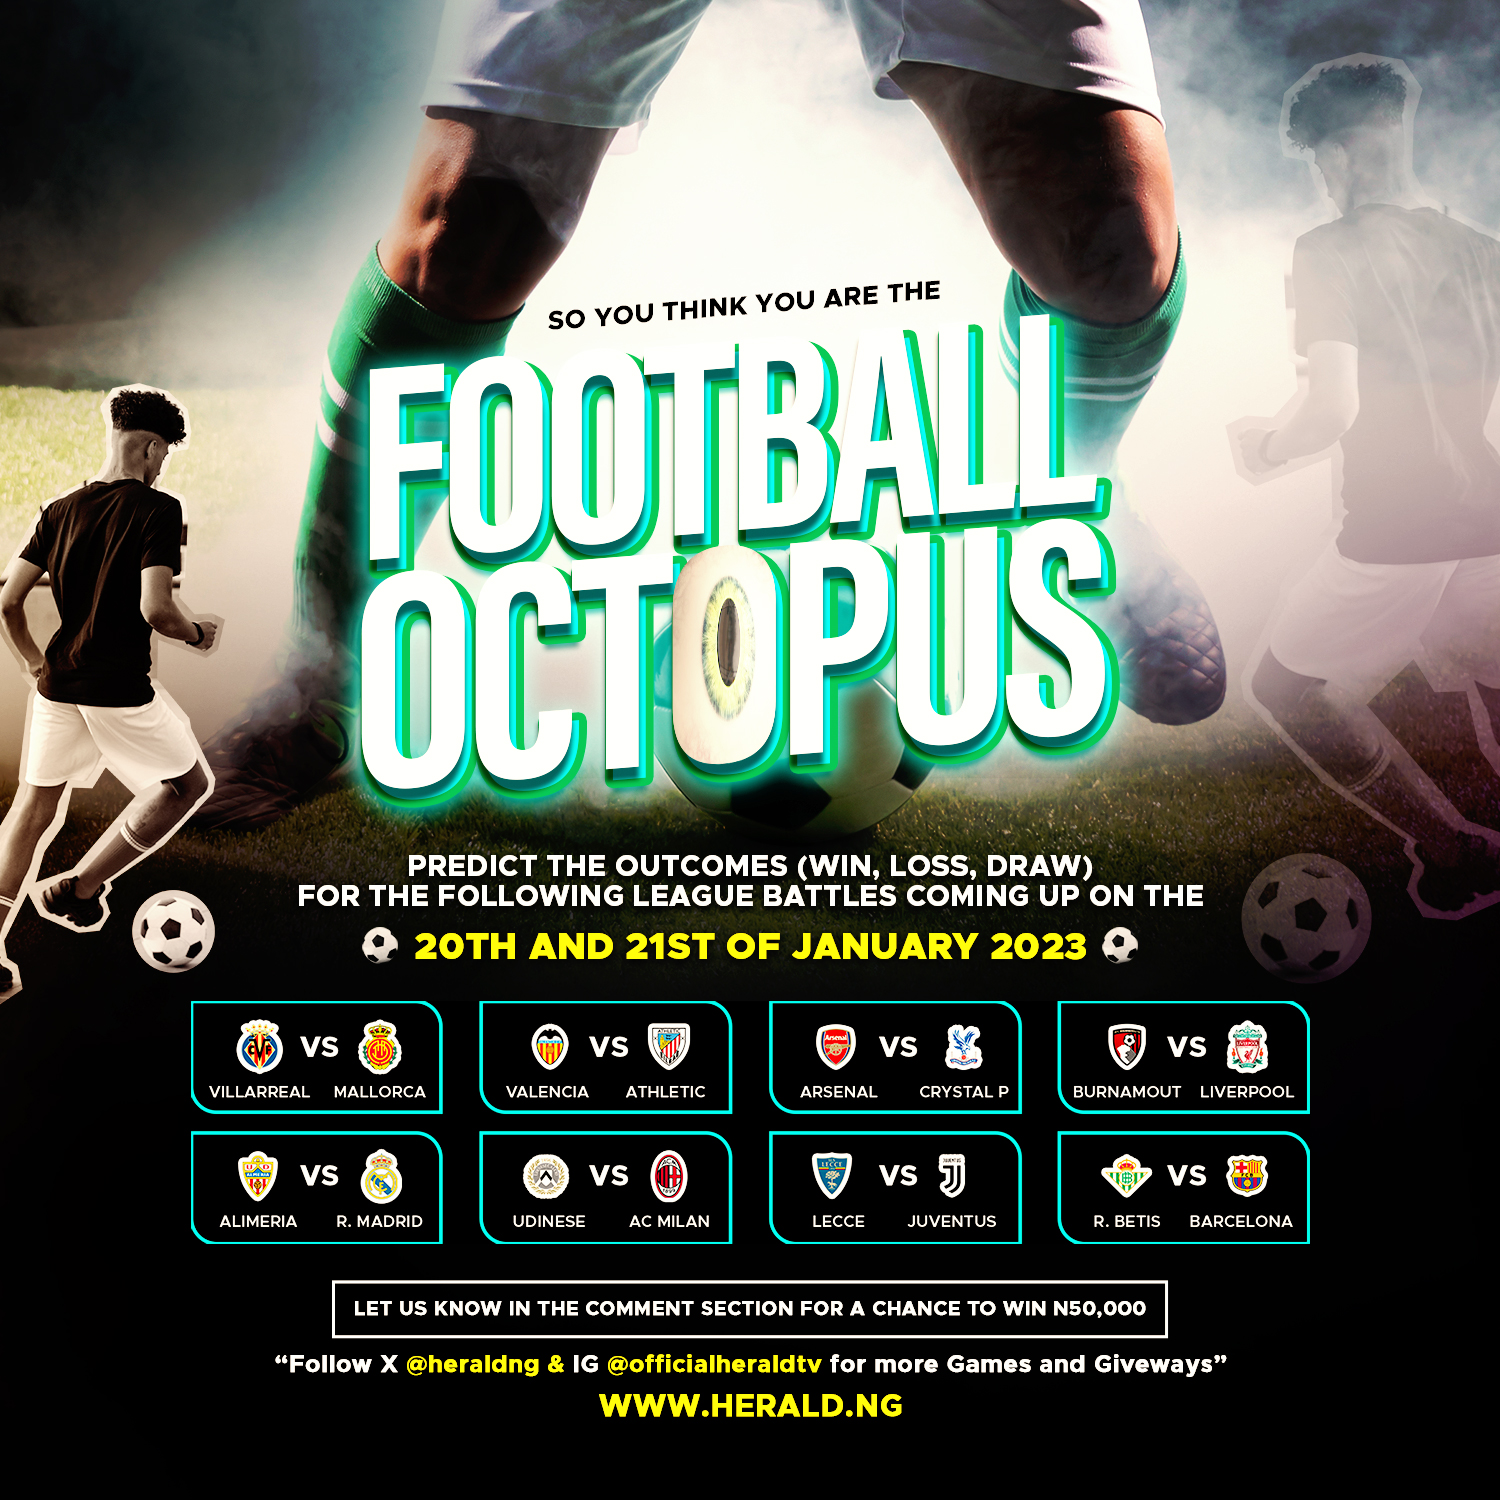 Football Octopus - Predict and win